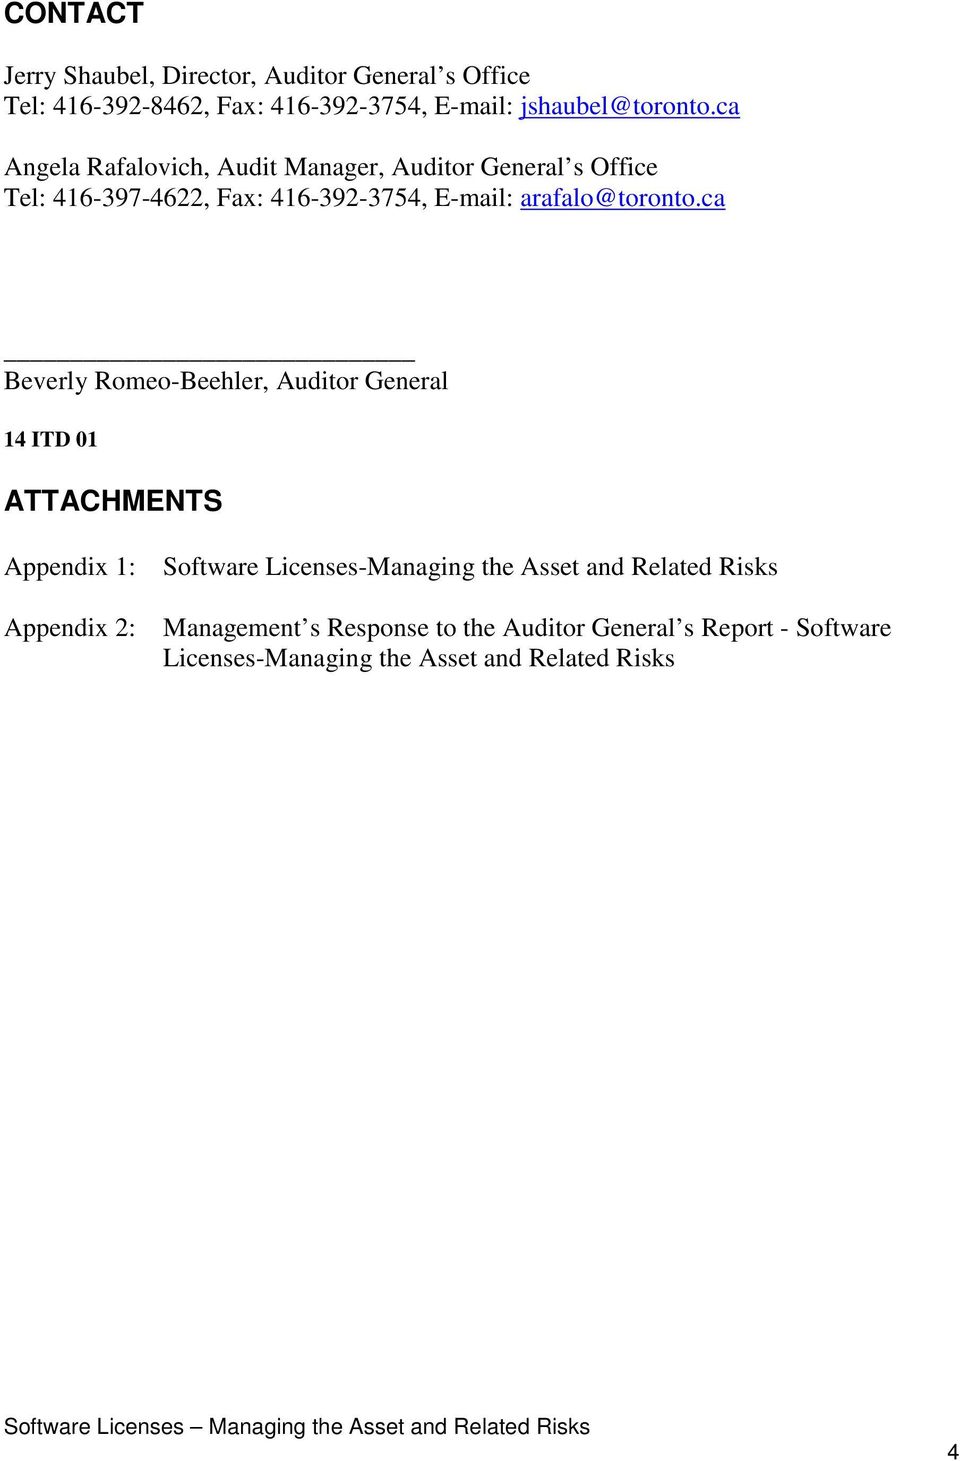 ca Beverly Romeo-Beehler, Auditor General 14 ITD 01 ATTACHMENTS Appendix 1: Appendix 2: Software Licenses-Managing the Asset and Related